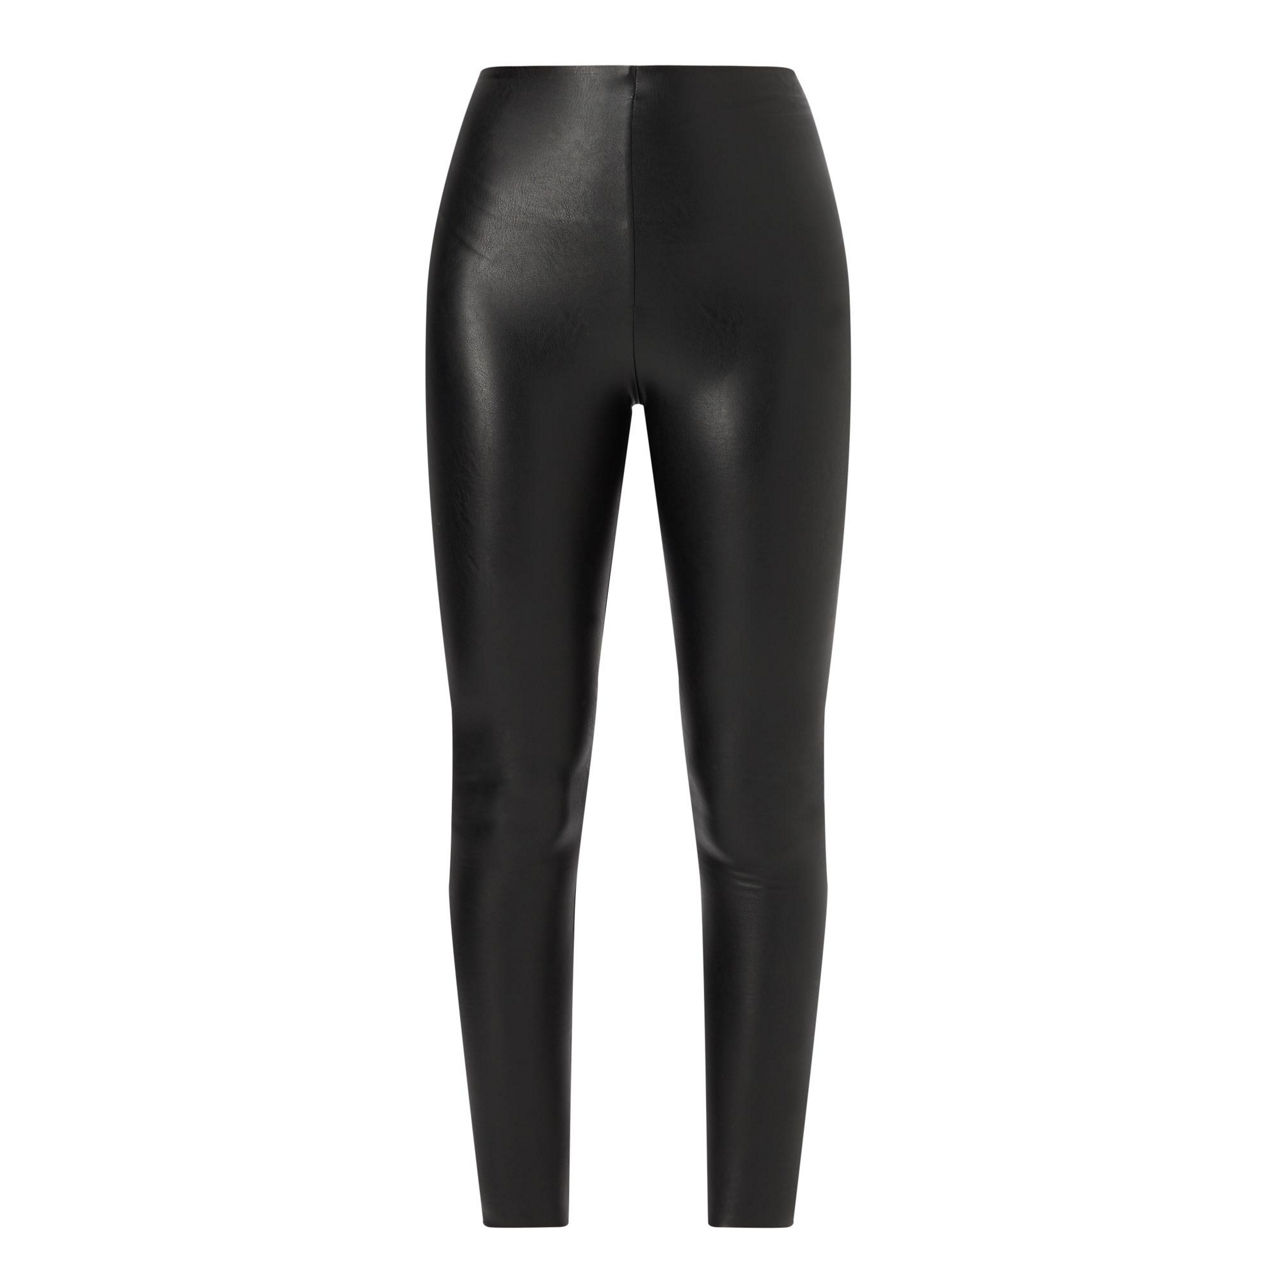 Kiana Tom - Flash sale NOW! 50% OFF Spanx faux leather leopard leggings -  i've never seen them 50% off!  Also my blanc noir mesh  Moto jacket at carbon38 15% off